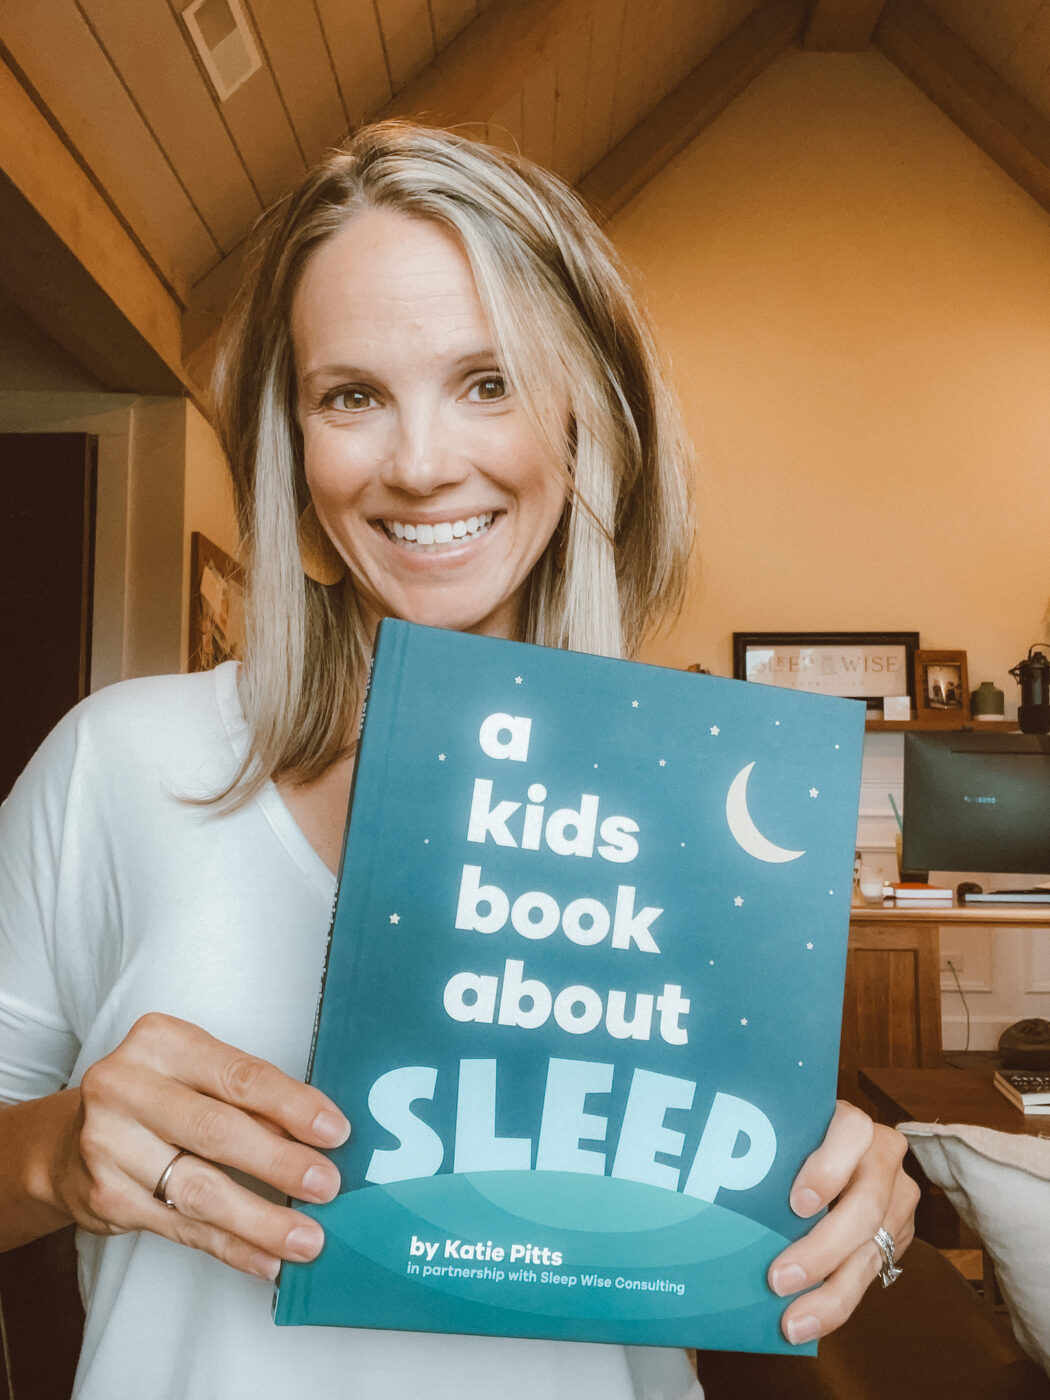 Author of 'A Kids Book About Sleep' shows off a copy of her children's book. 